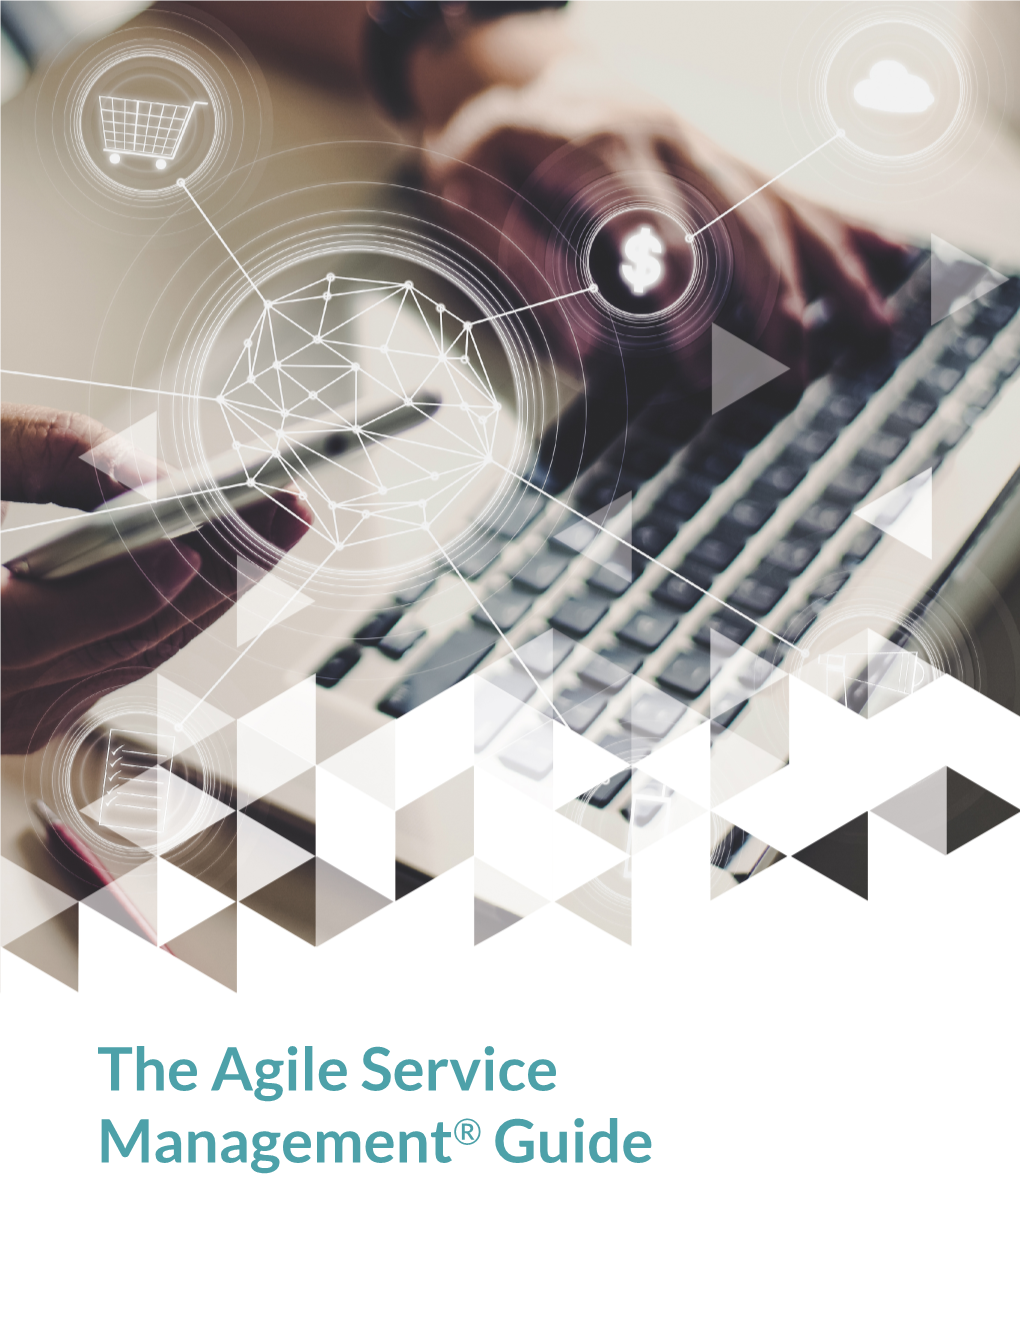 The Agile Service Management® Guide